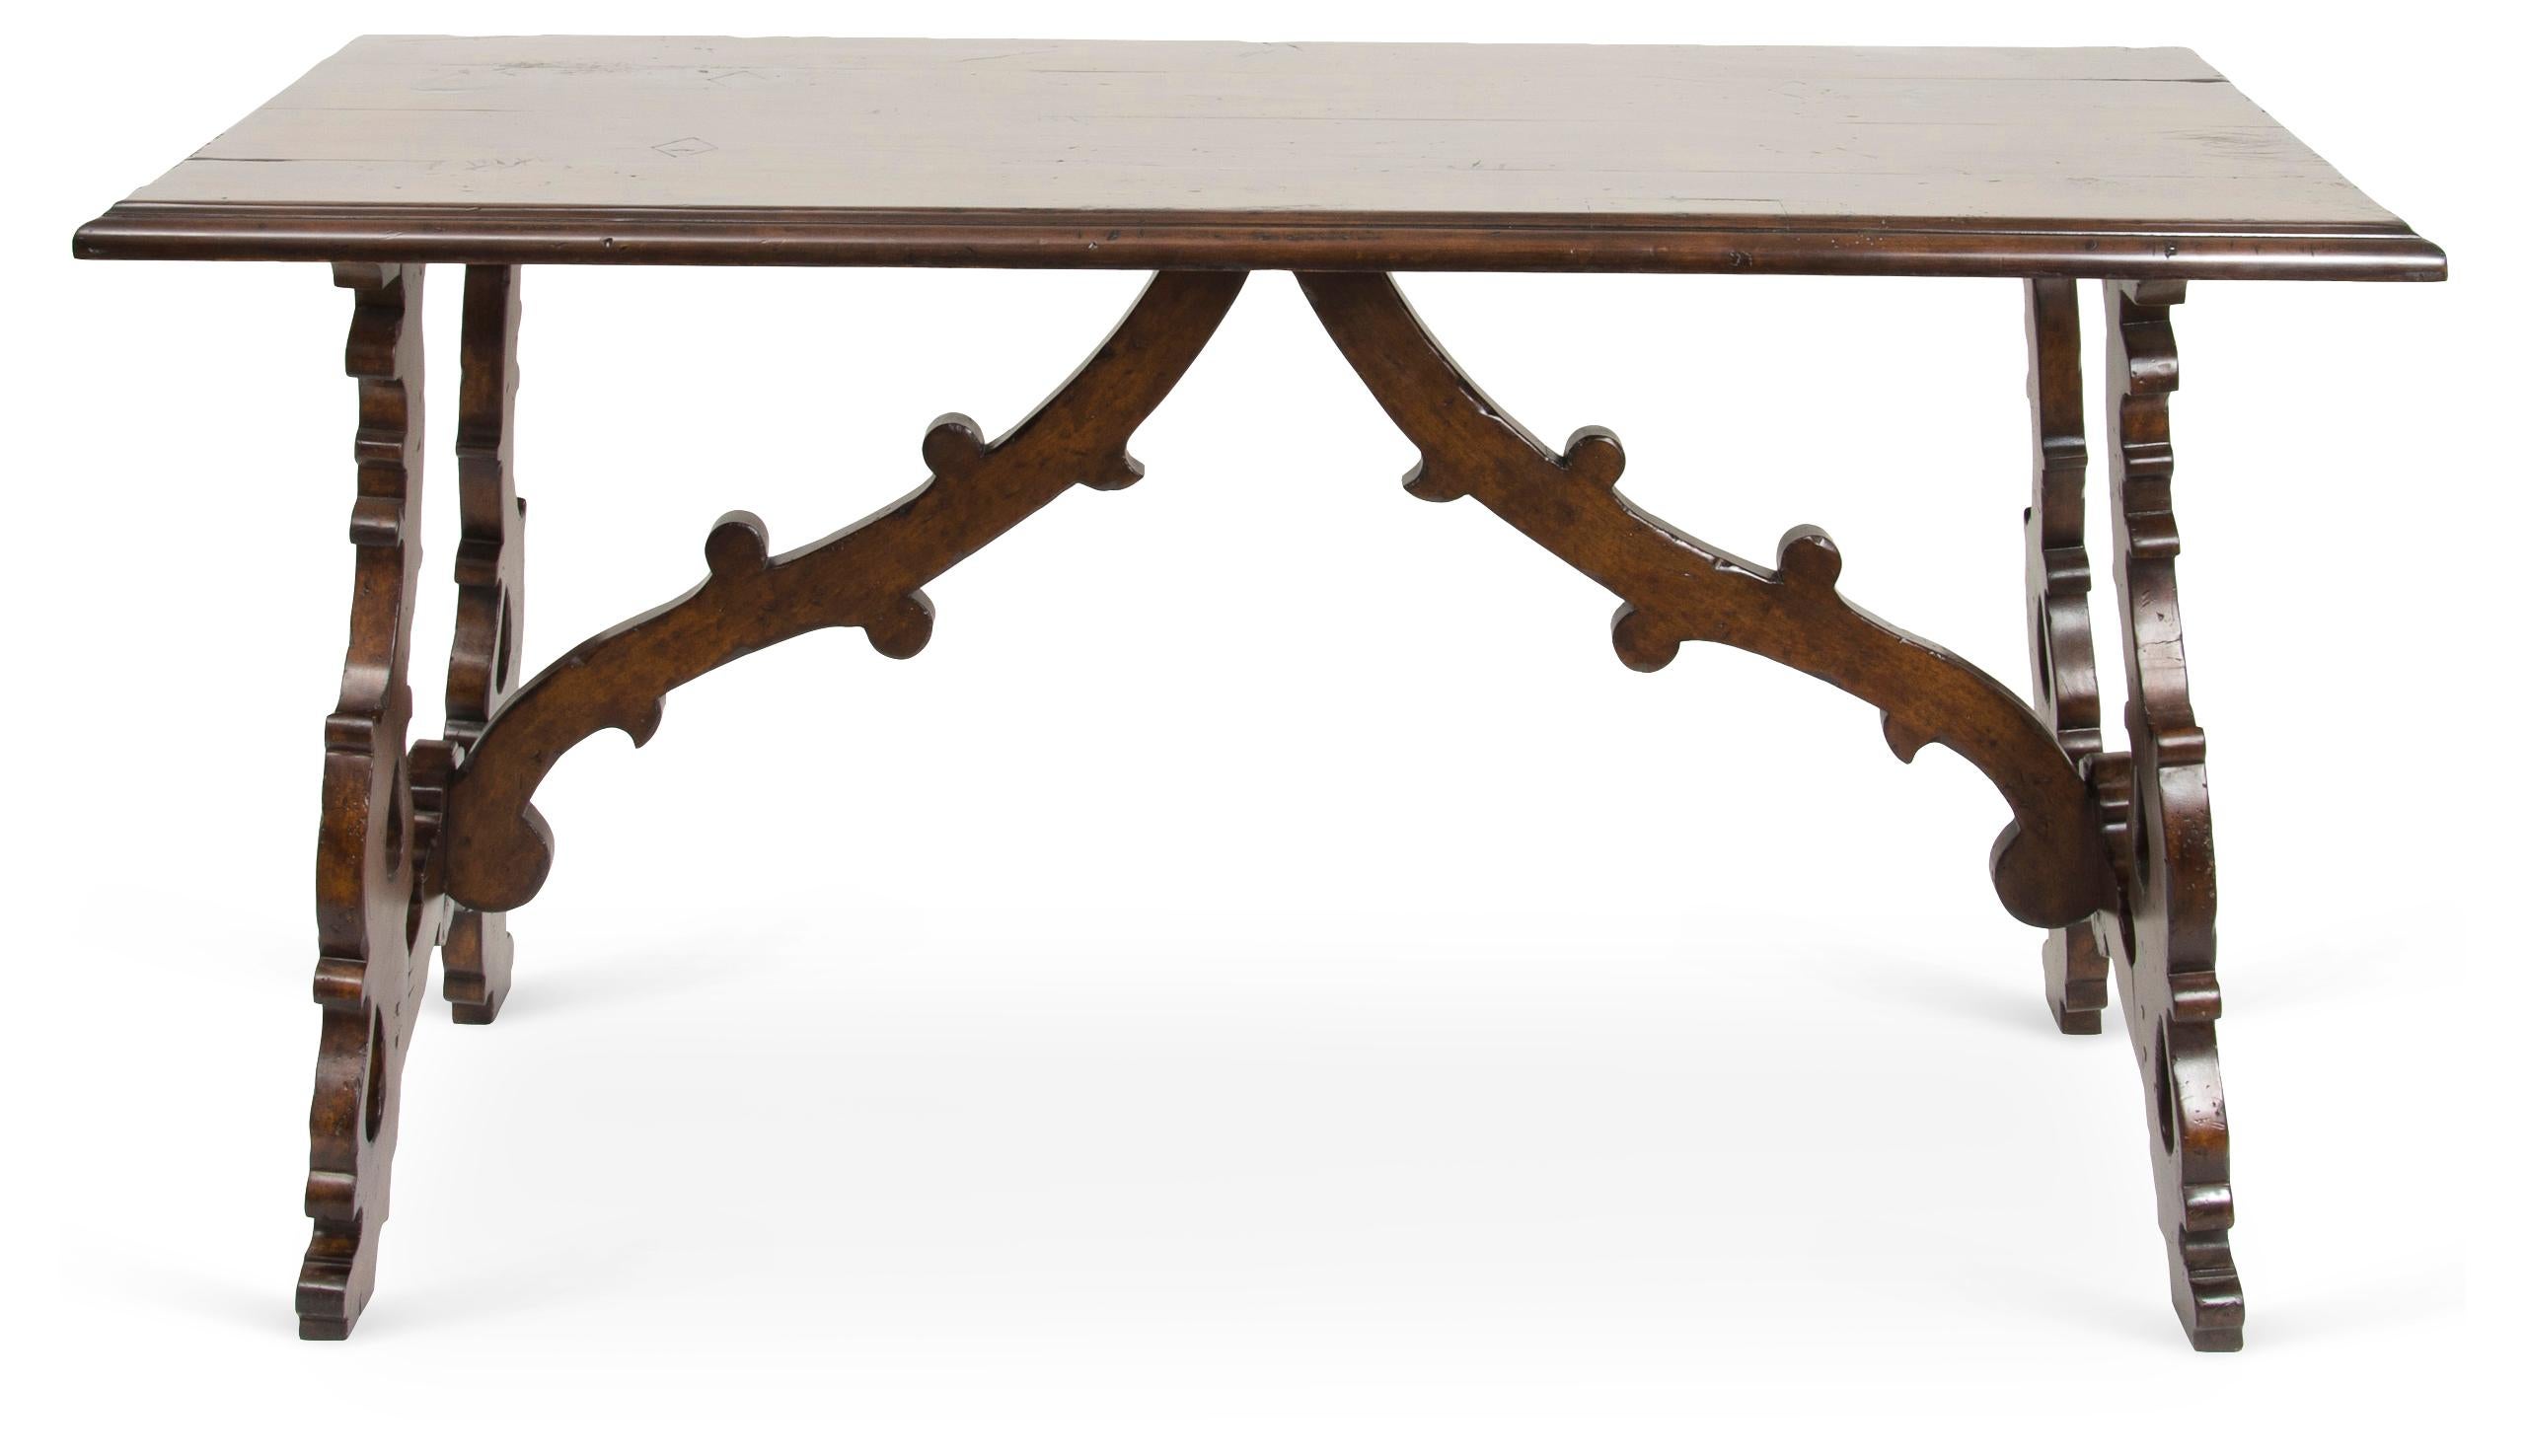 Antique style Baroque Walnut Dining Table In New Condition For Sale In Ballard, CA